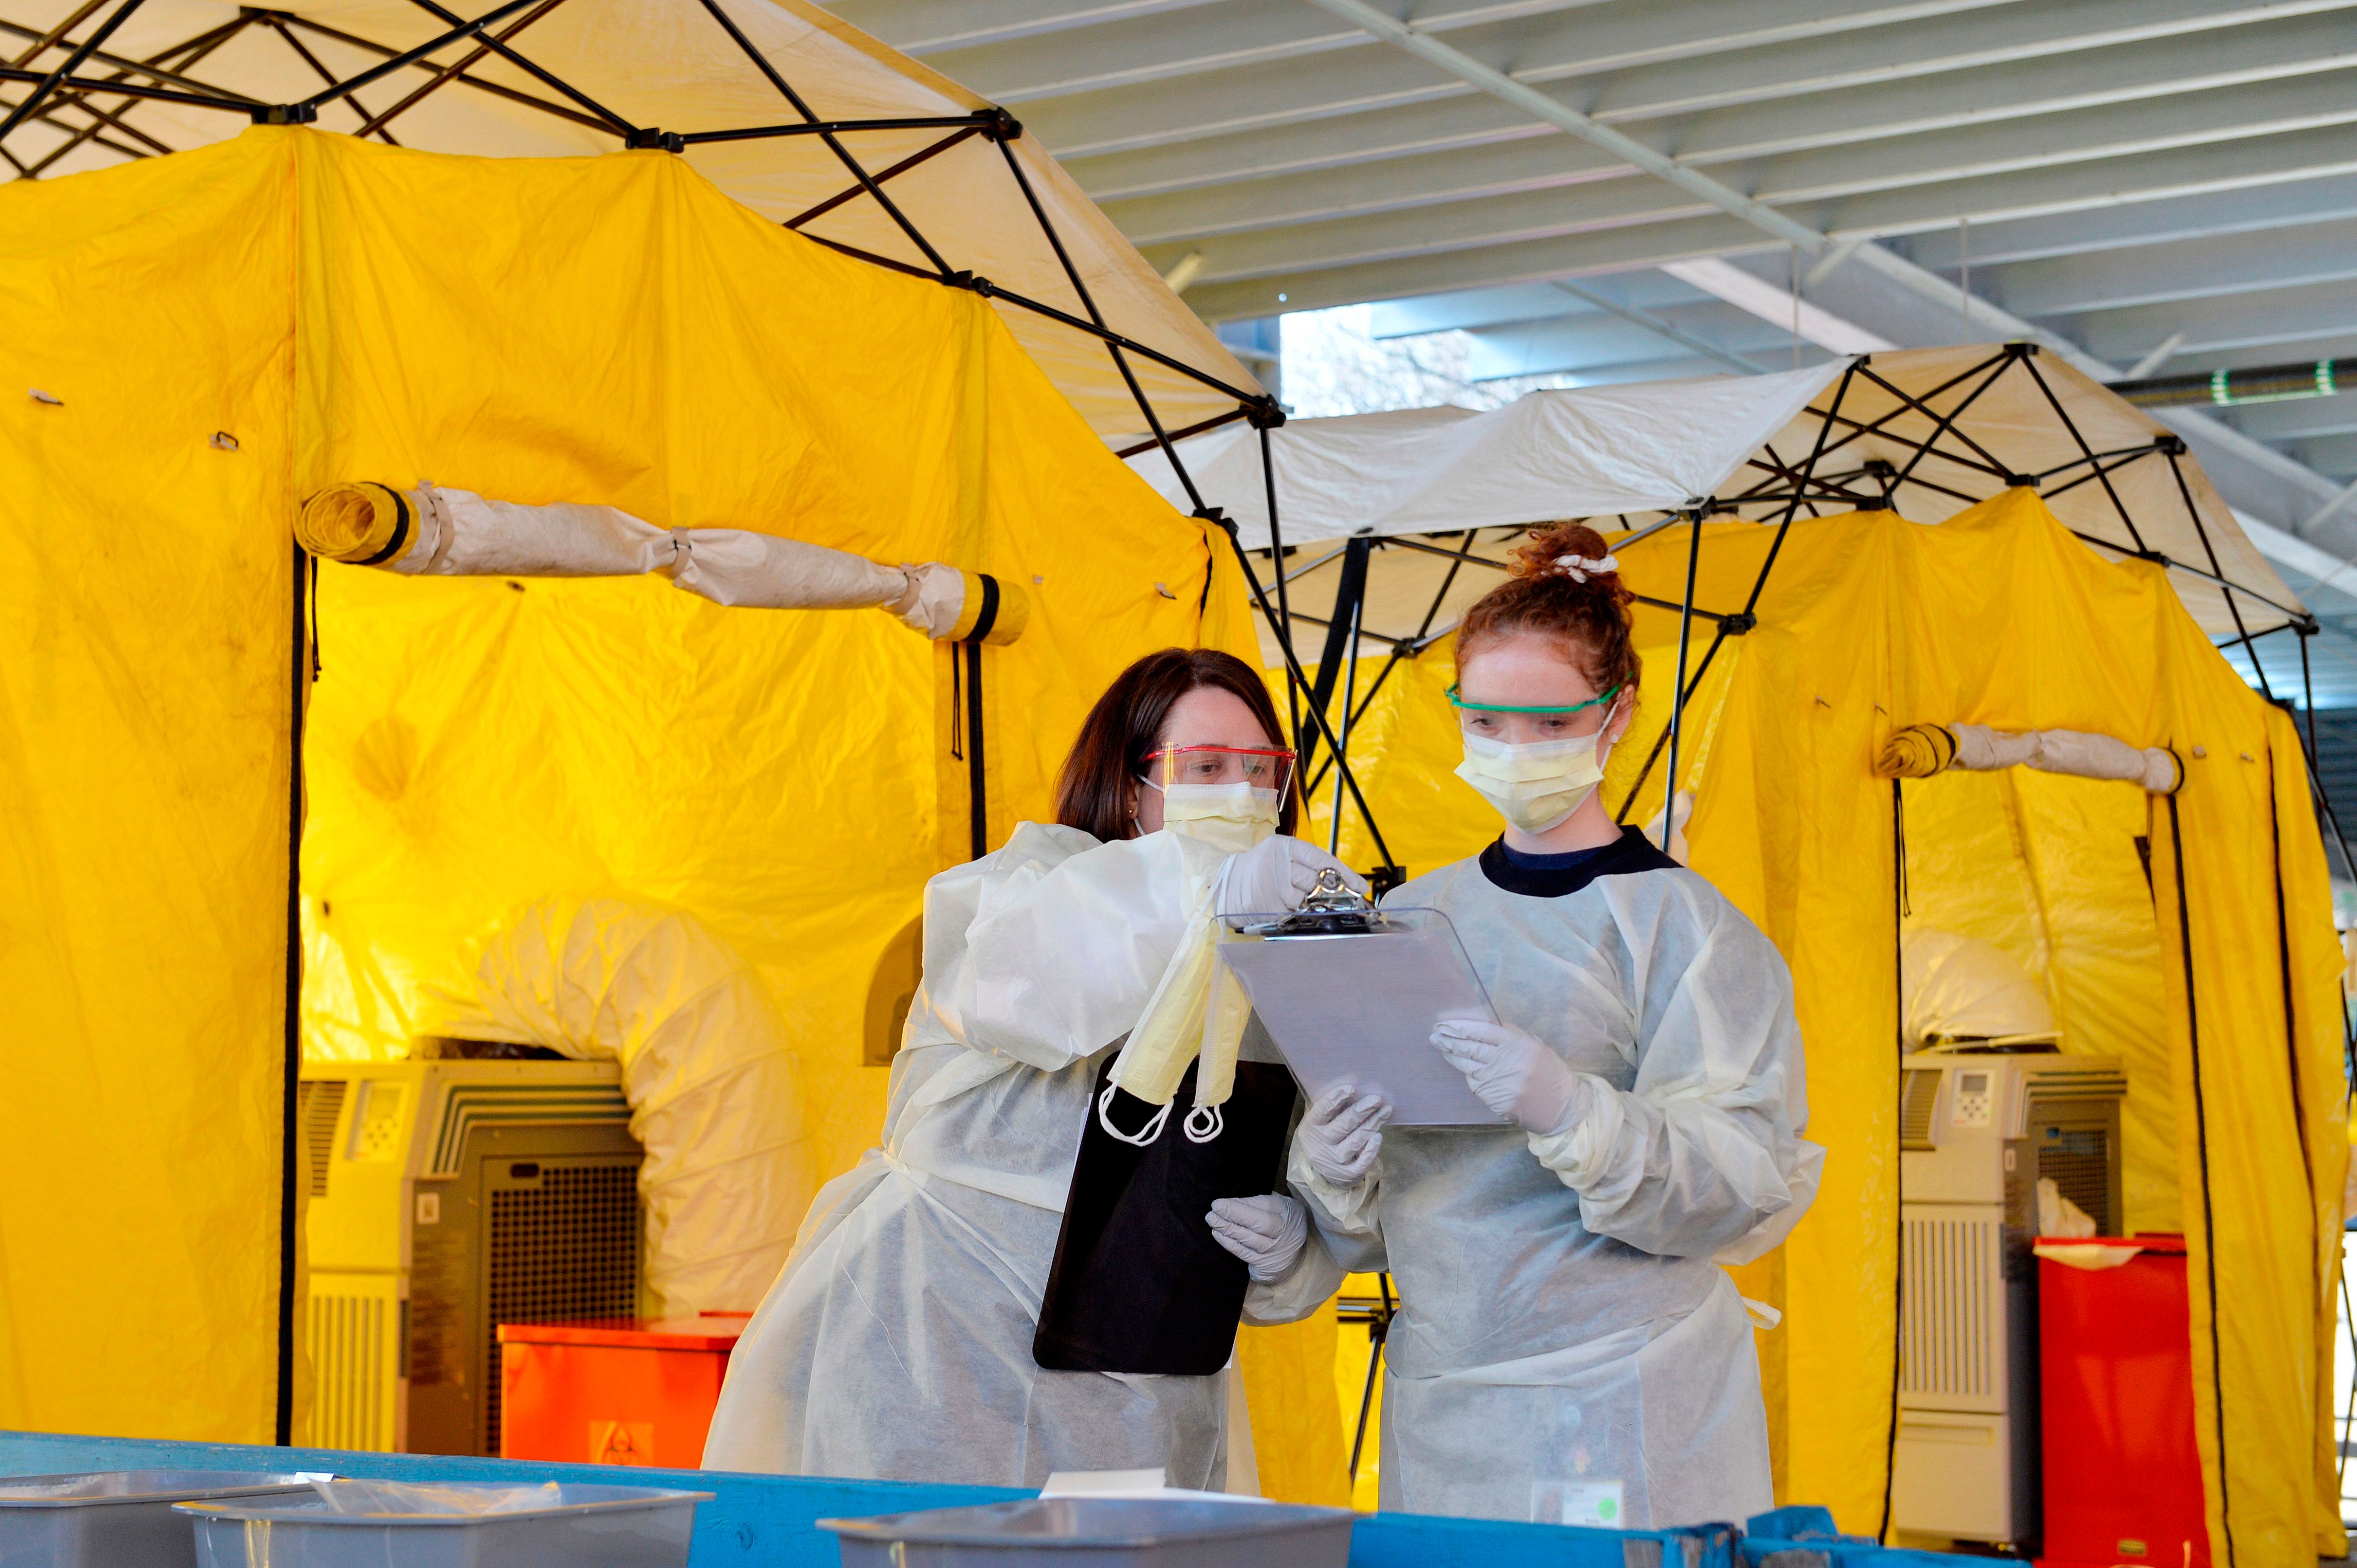 Hospital clinicians work to test patients for the coronavirus, Covid-19 at Newton-Wellesley Hospital in Newton, Massachusetts on March 18, 2020, as the hospital has set up three tents in the parking garage where patients who have been pre-screened can show up for testing. (Joseph Prezioso—AFP/Getty Images)